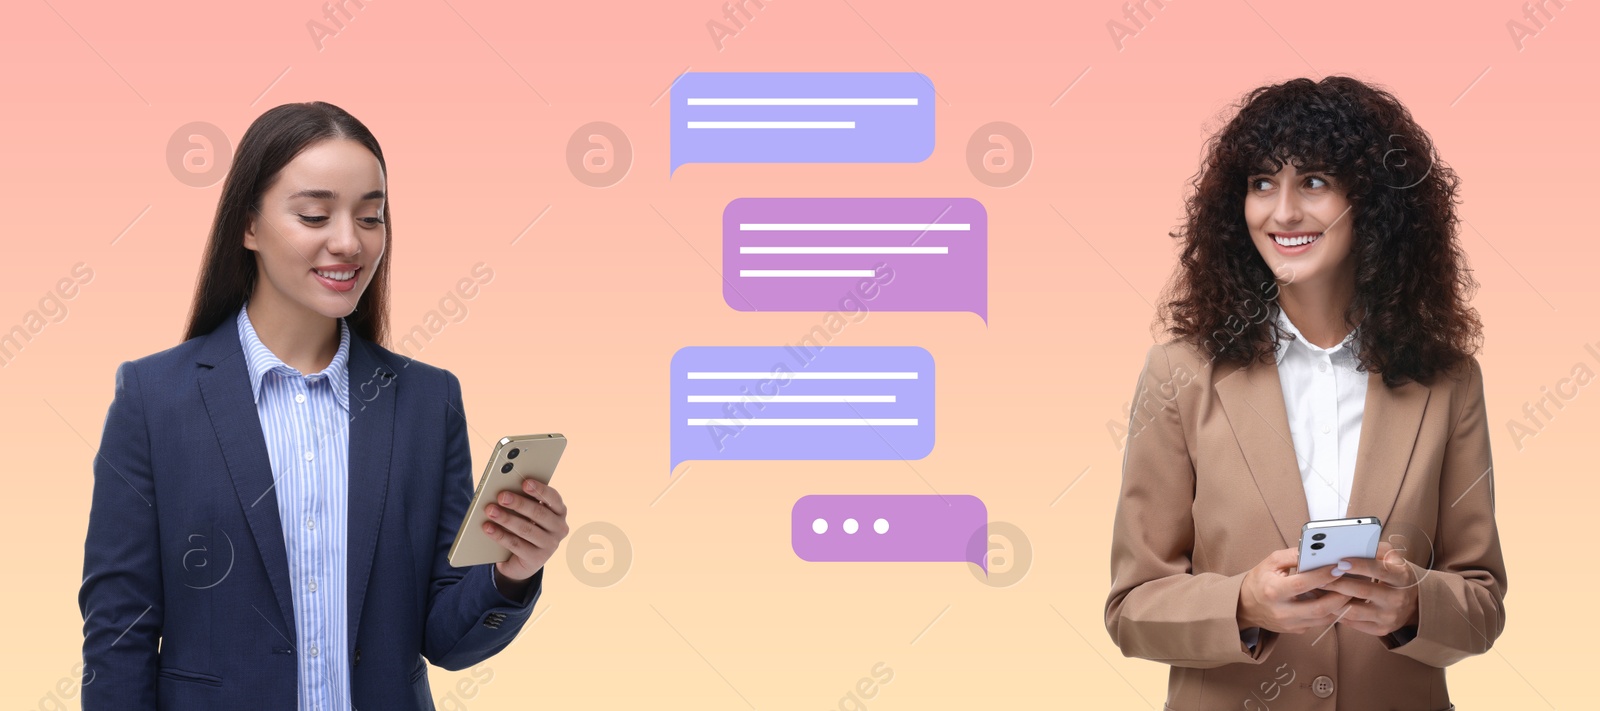 Image of Women with smartphones texting on color gradient background, banner design. Message bubbles between them